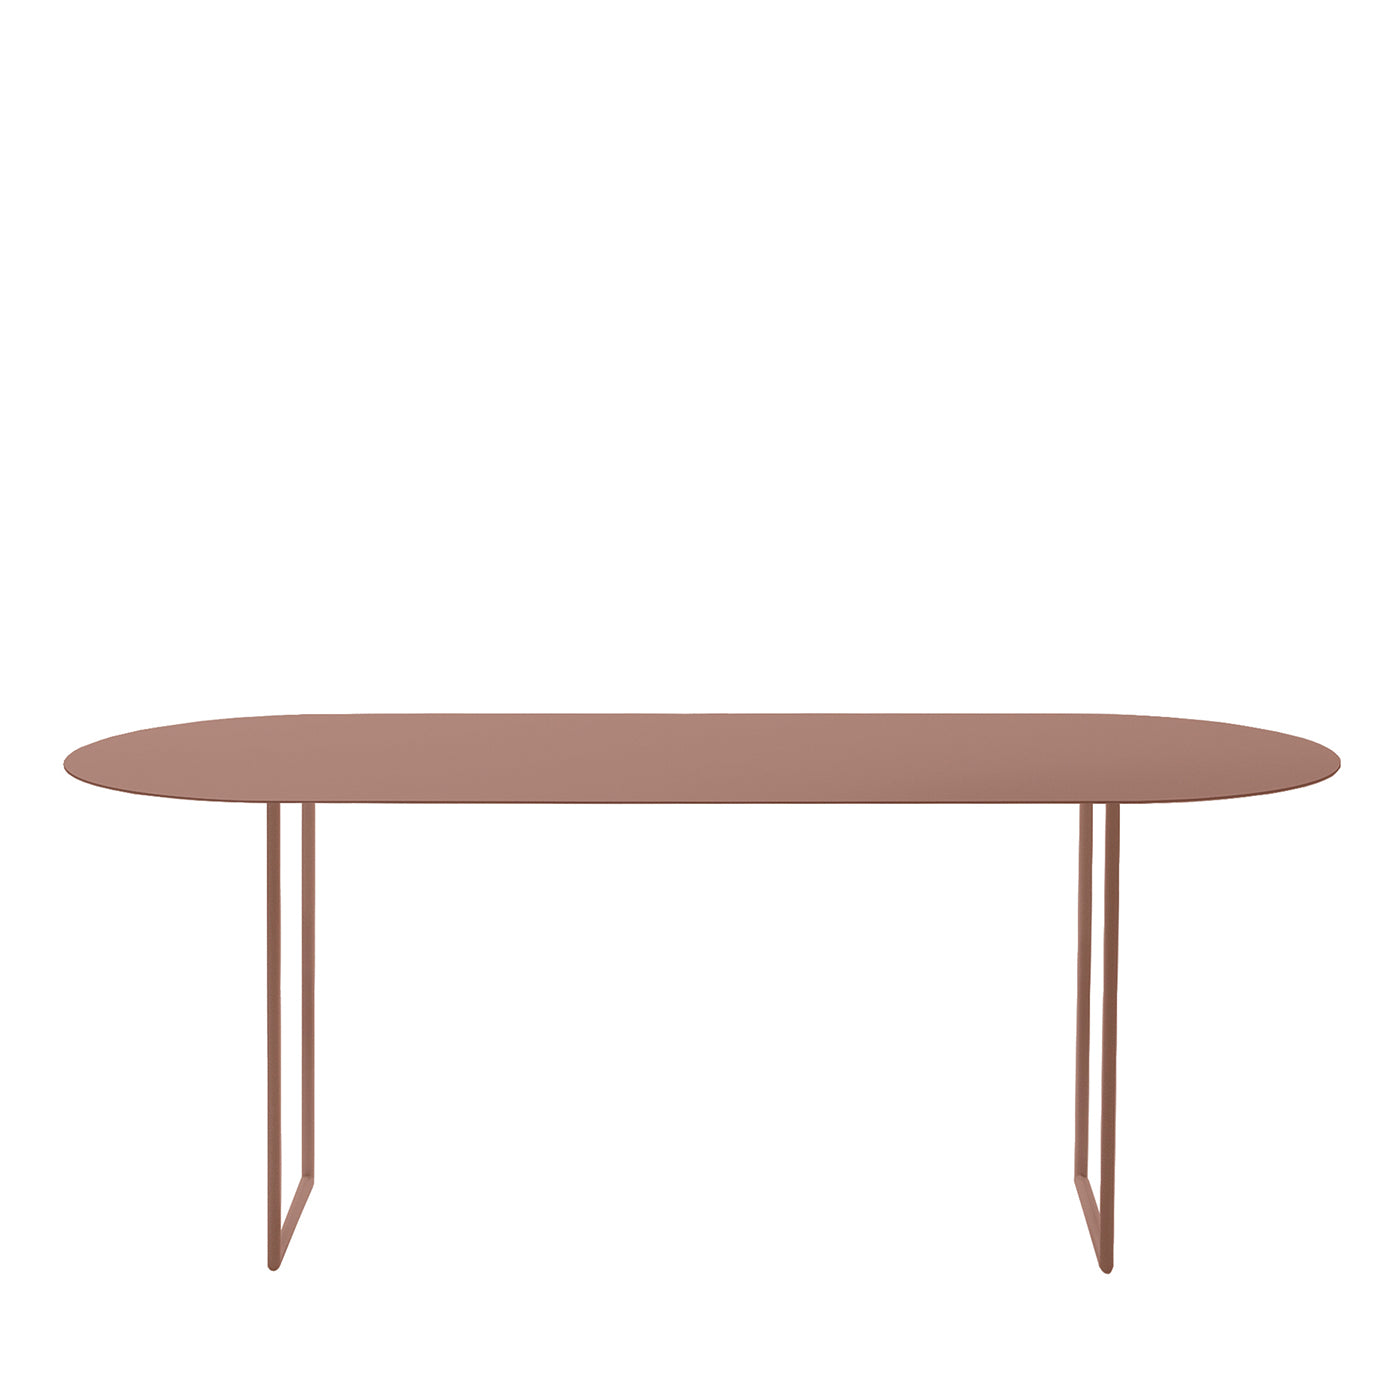 Shine Elliptic Brown Dining Table by Kathrin Charlotte Bohr - Main view